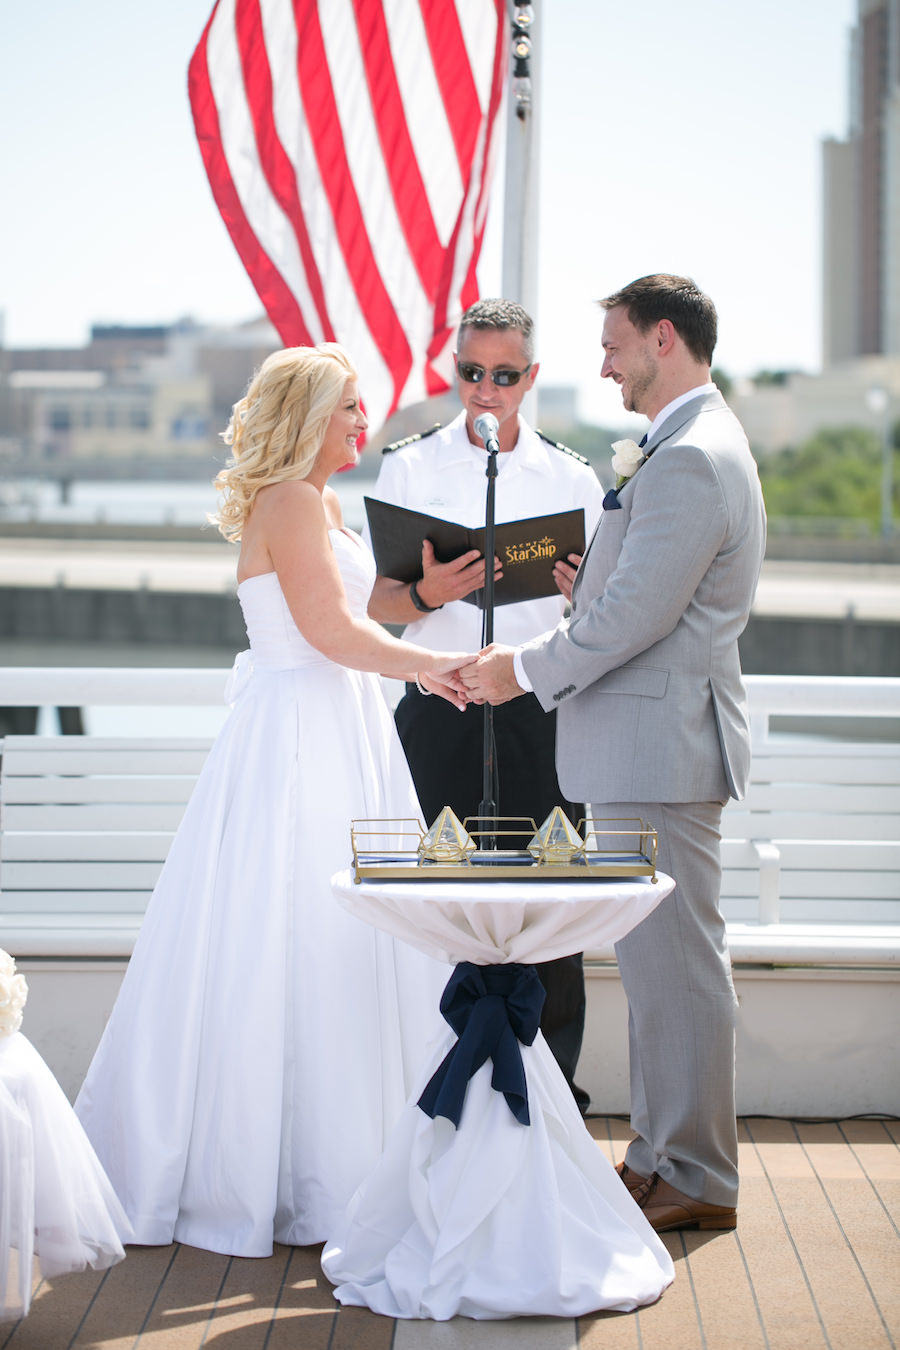 Bride and Groom Exchanging Vows at Tampa Waterfront Wedding Ceremony on the Yacht Starship Sensation | Tampa Wedding Photographer Carrie Wides Photography